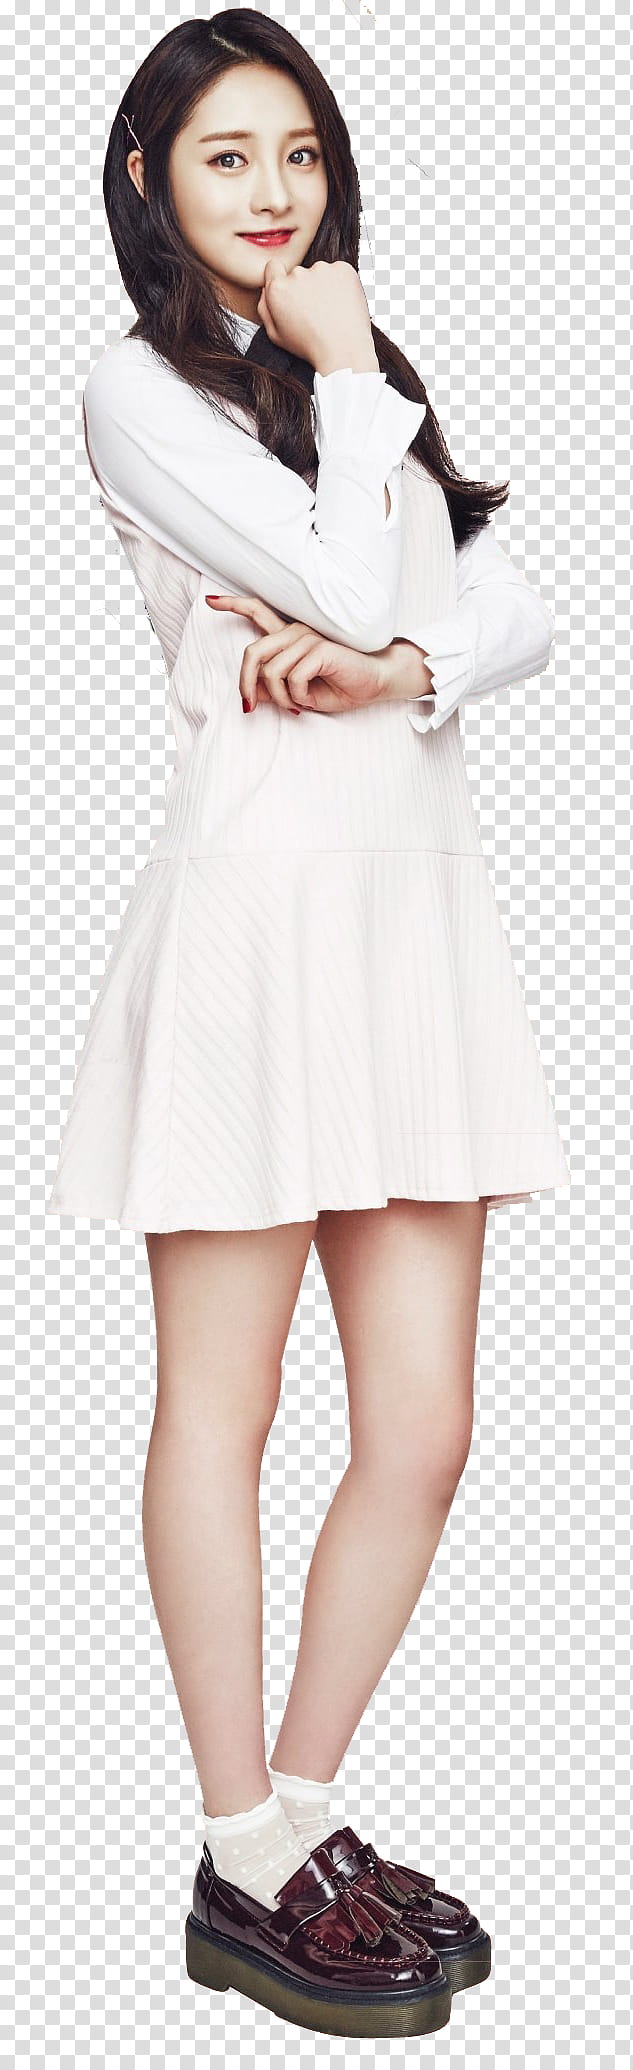 Pristin Pledis Girlz First Concert, woman wearing white long-sleeved dress transparent background PNG clipart